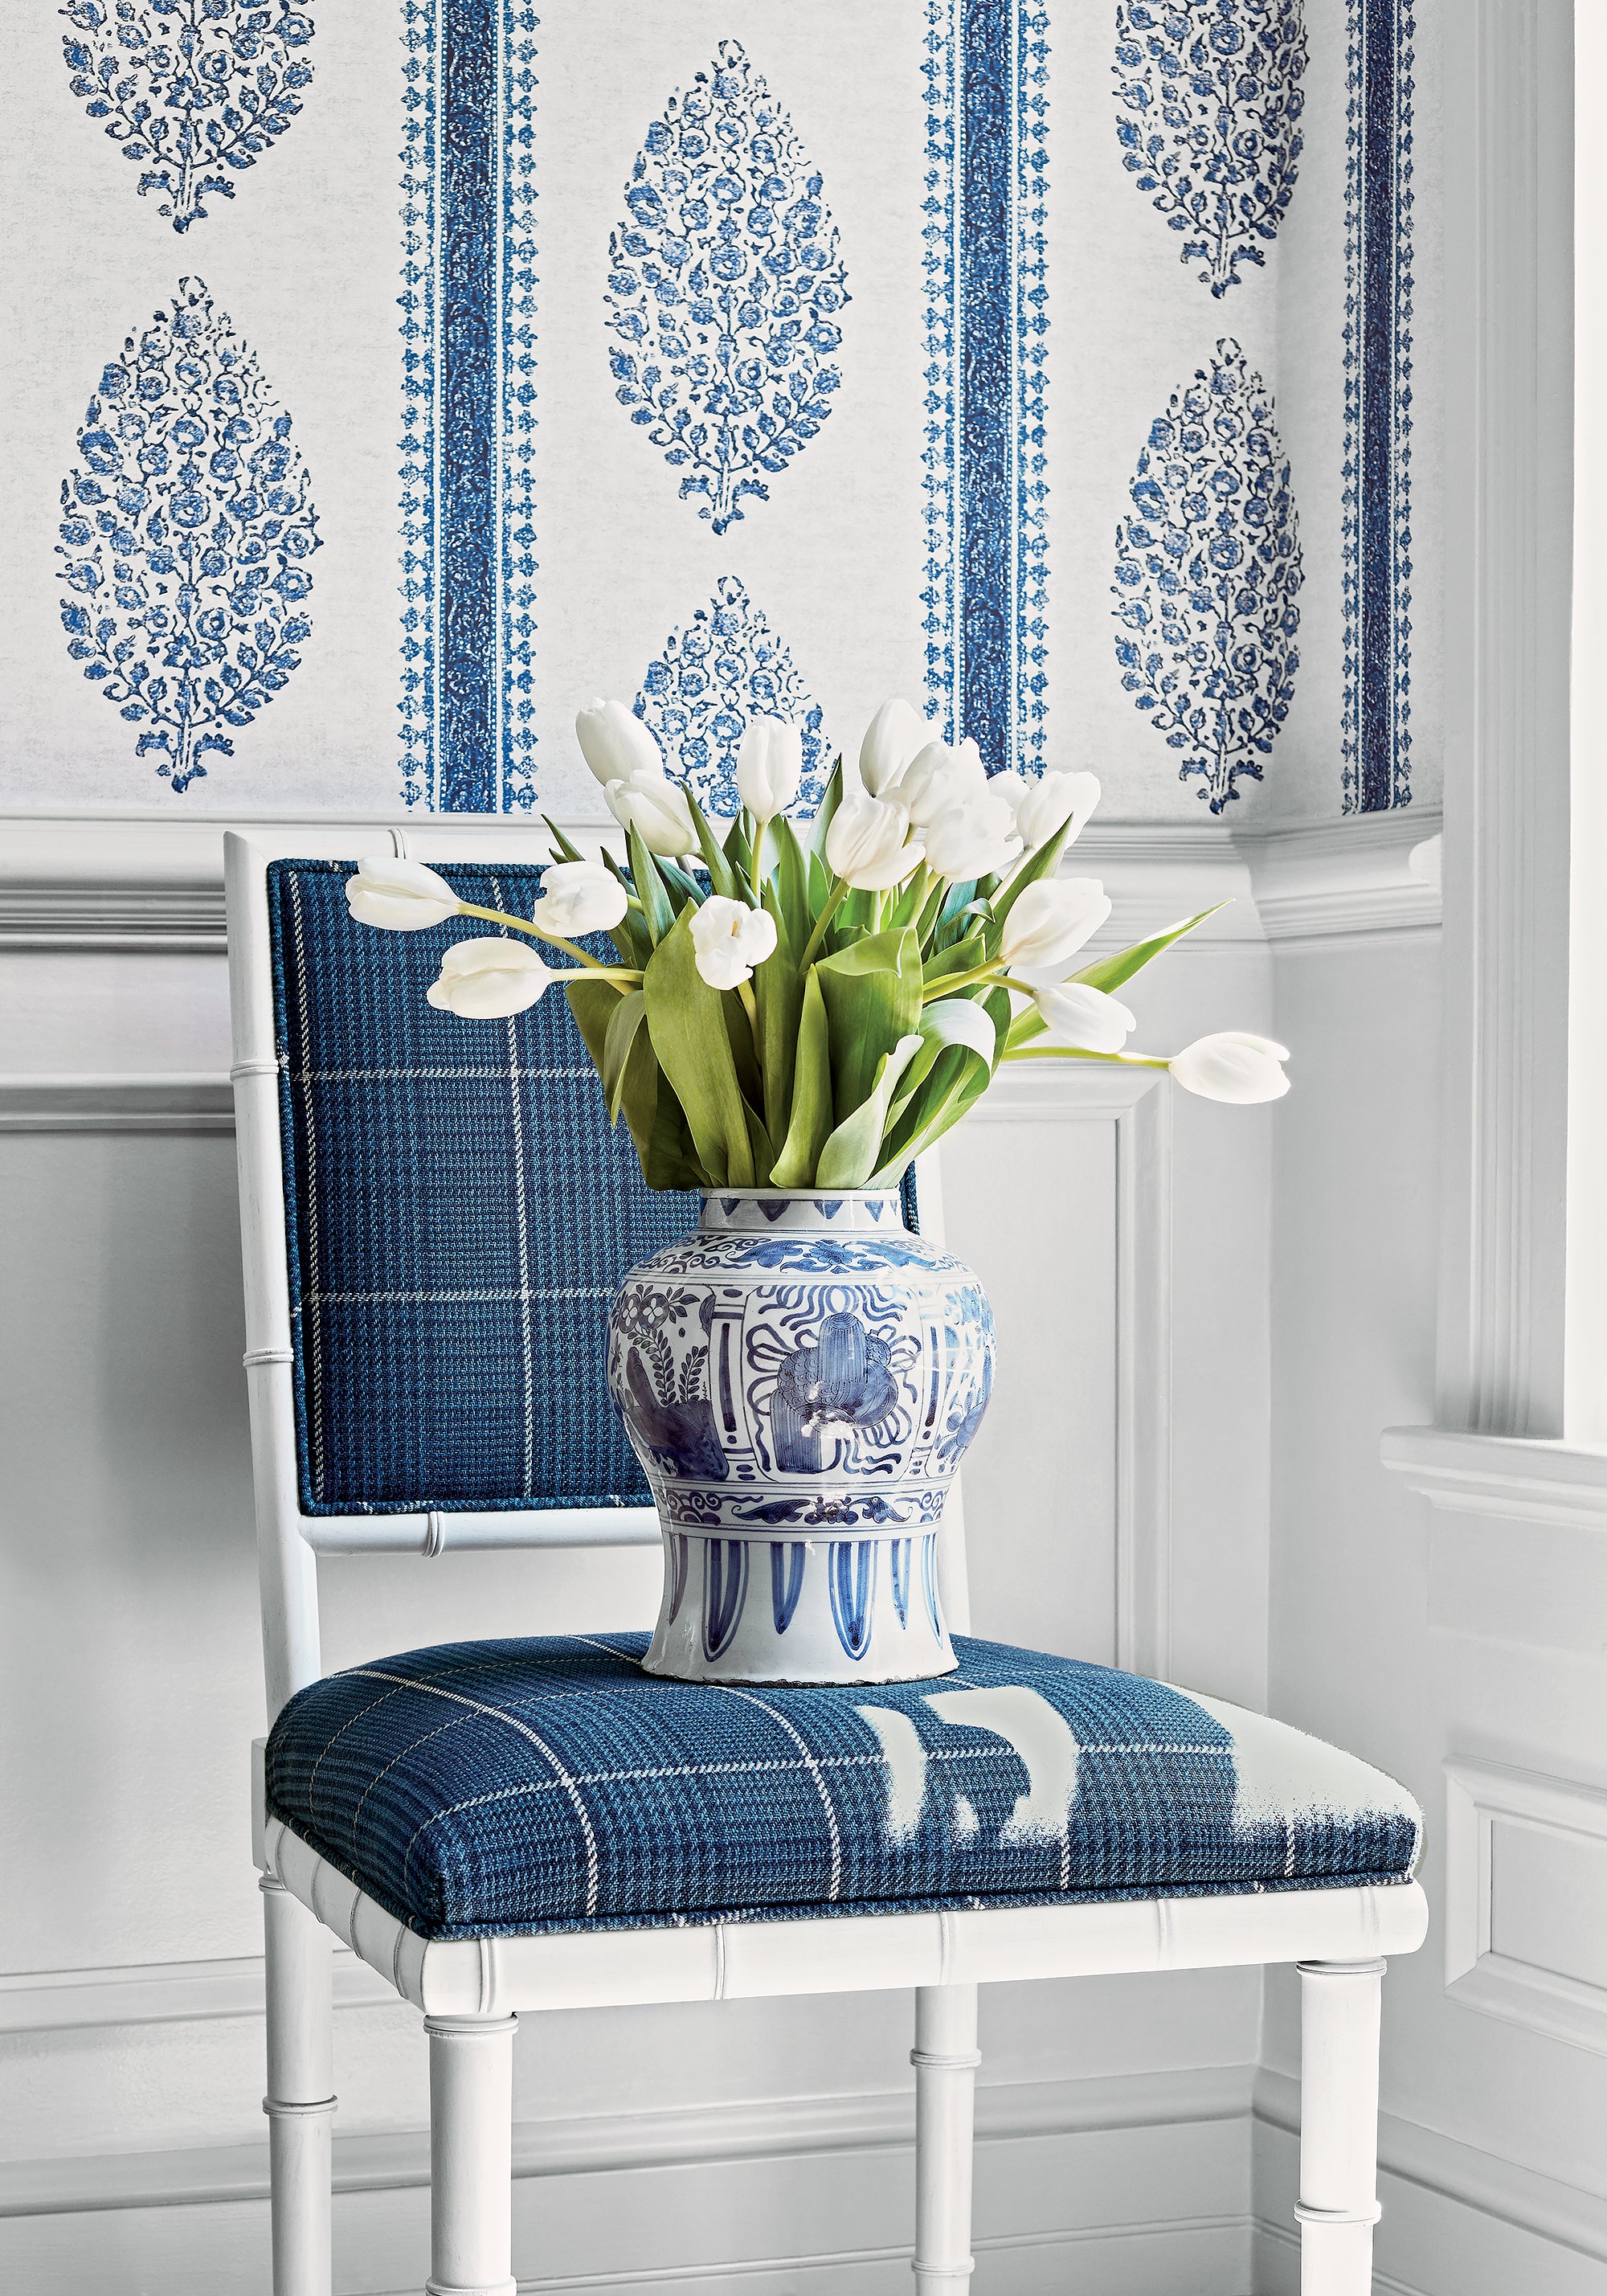 Darien Dining Chair in Grassmarket Check woven fabric in navy color - pattern number W710201 by Thibaut in the Colony collection